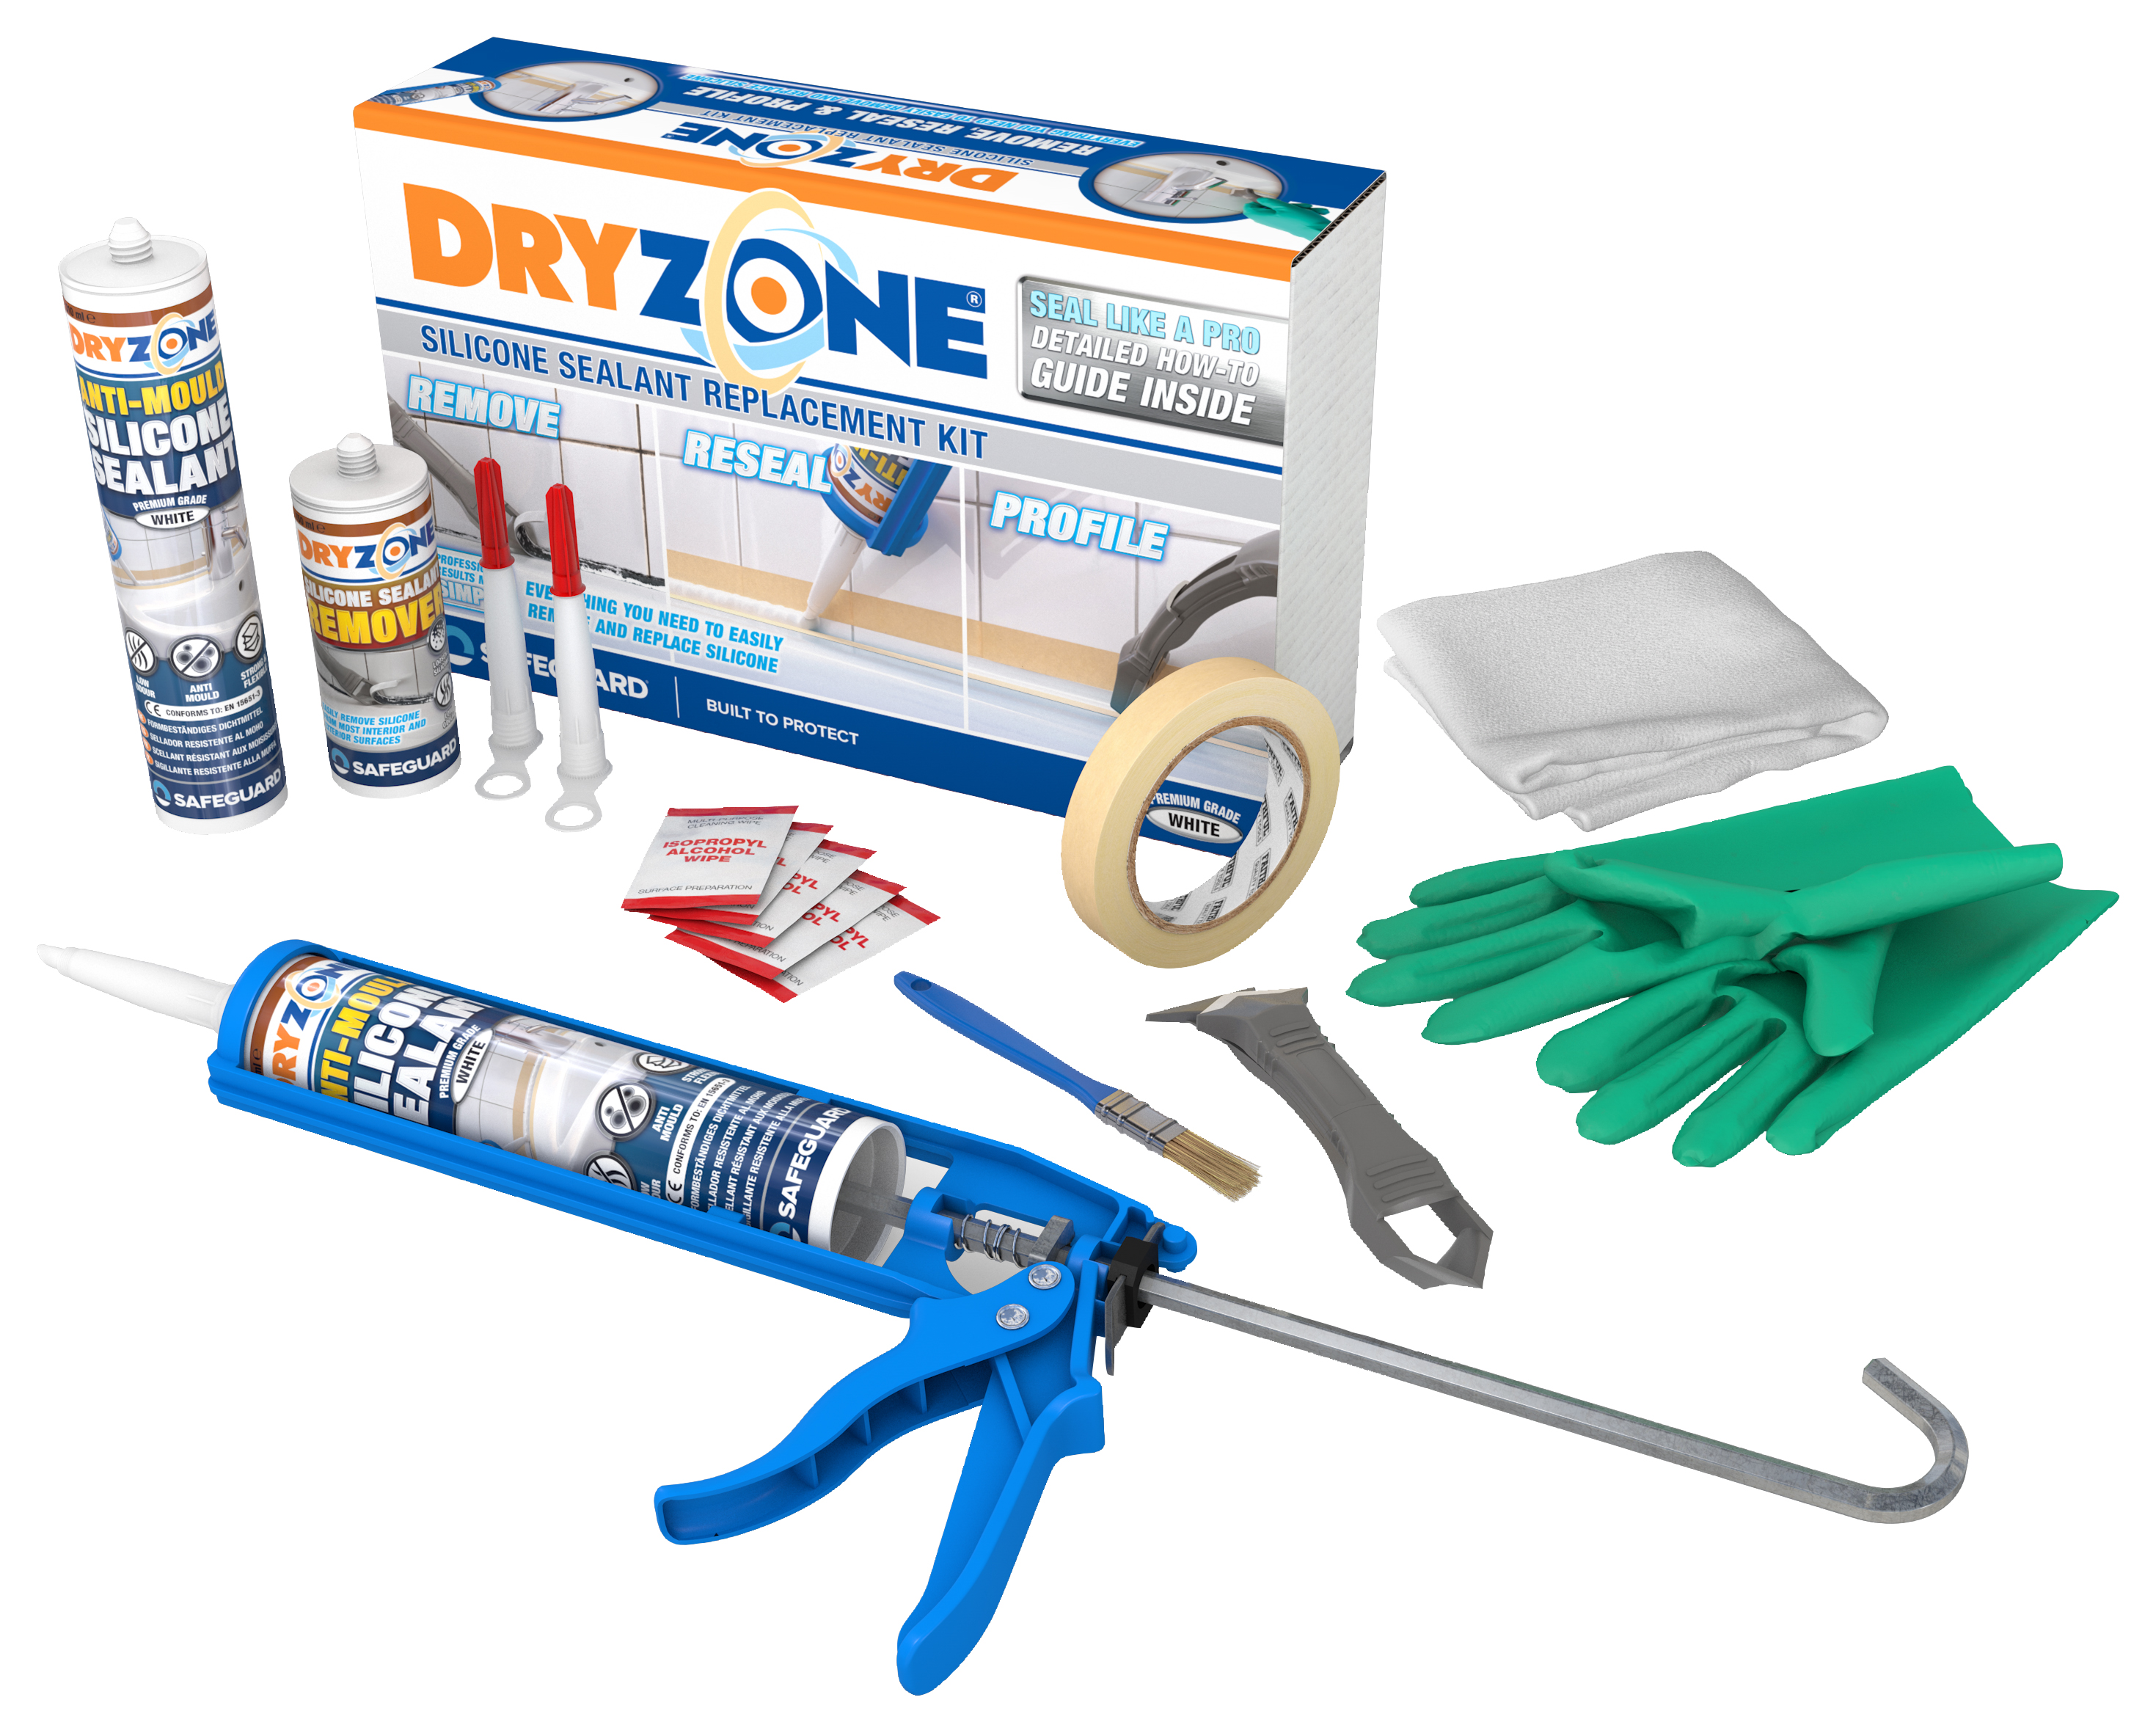 Image of Dryzone Anti-Mould Silicone Sealant Replacement Kit